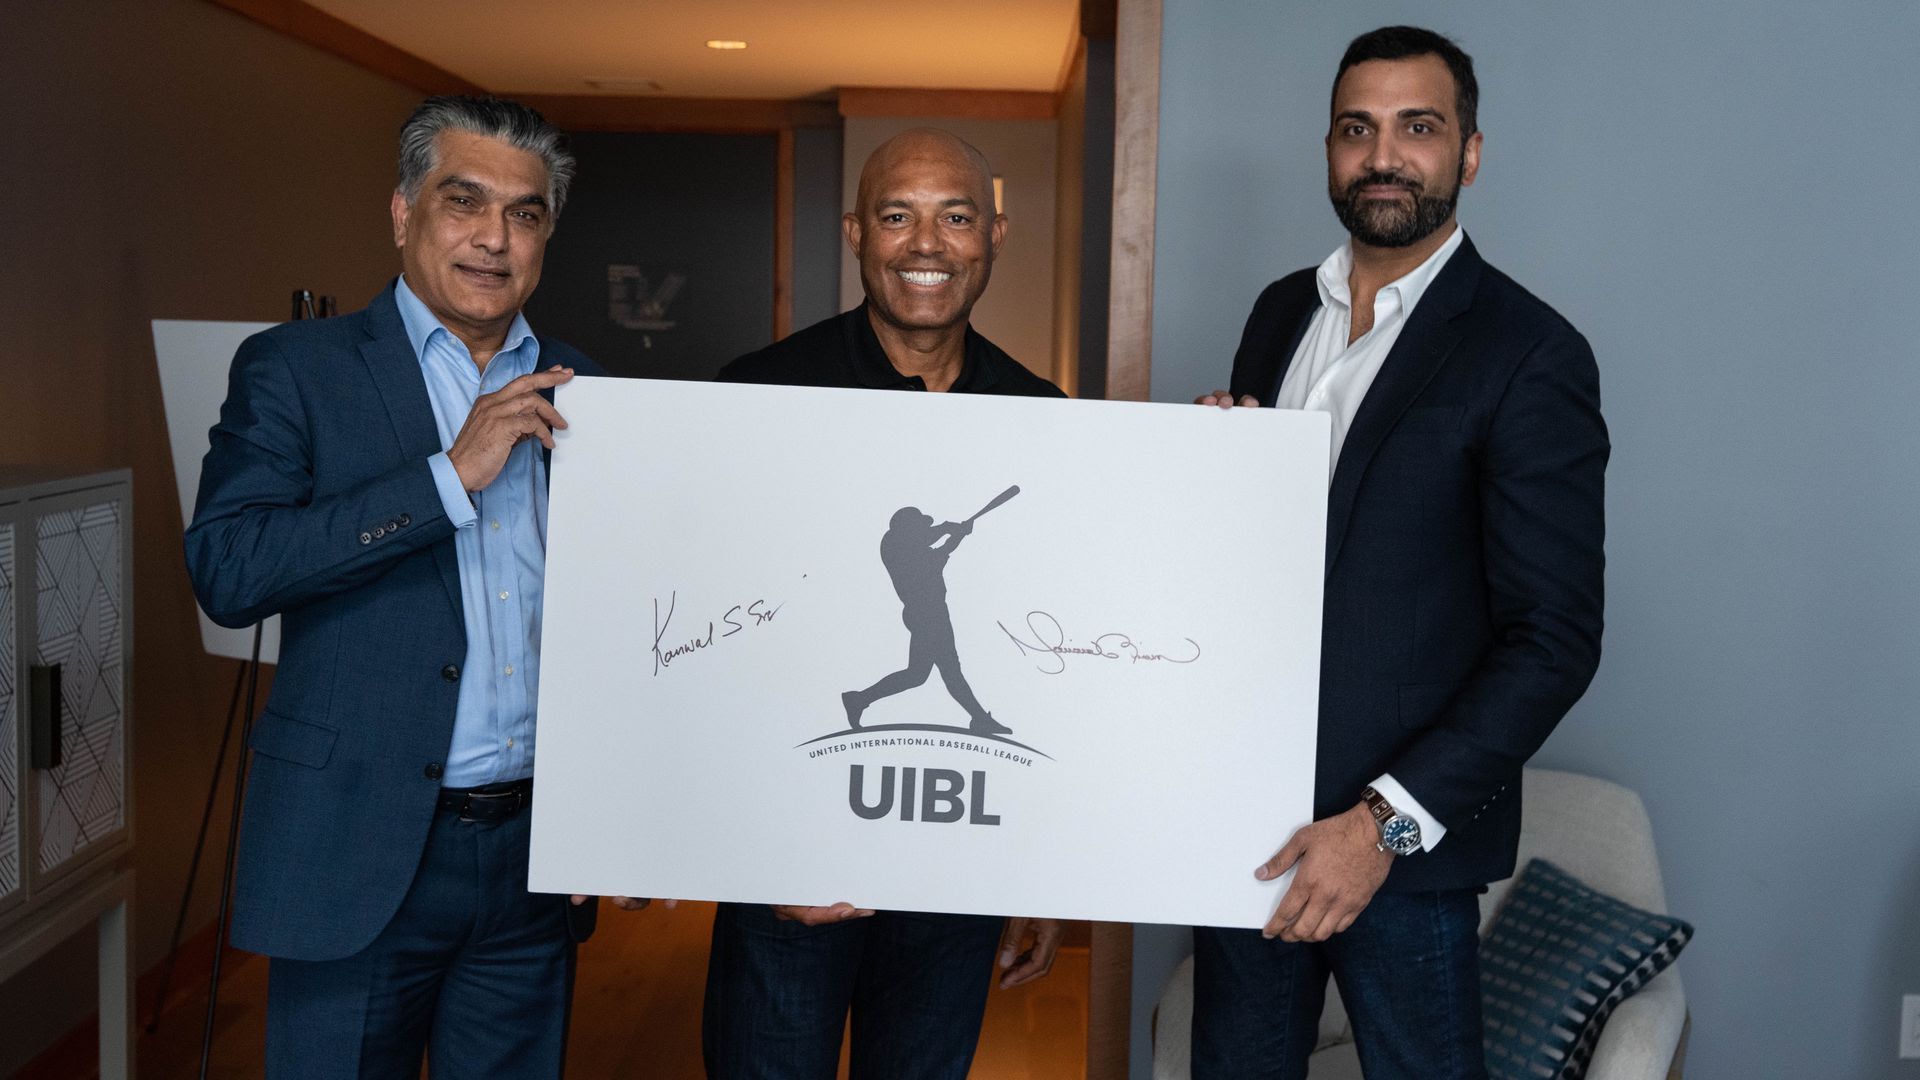 mariano rivera and UIBL co-founders